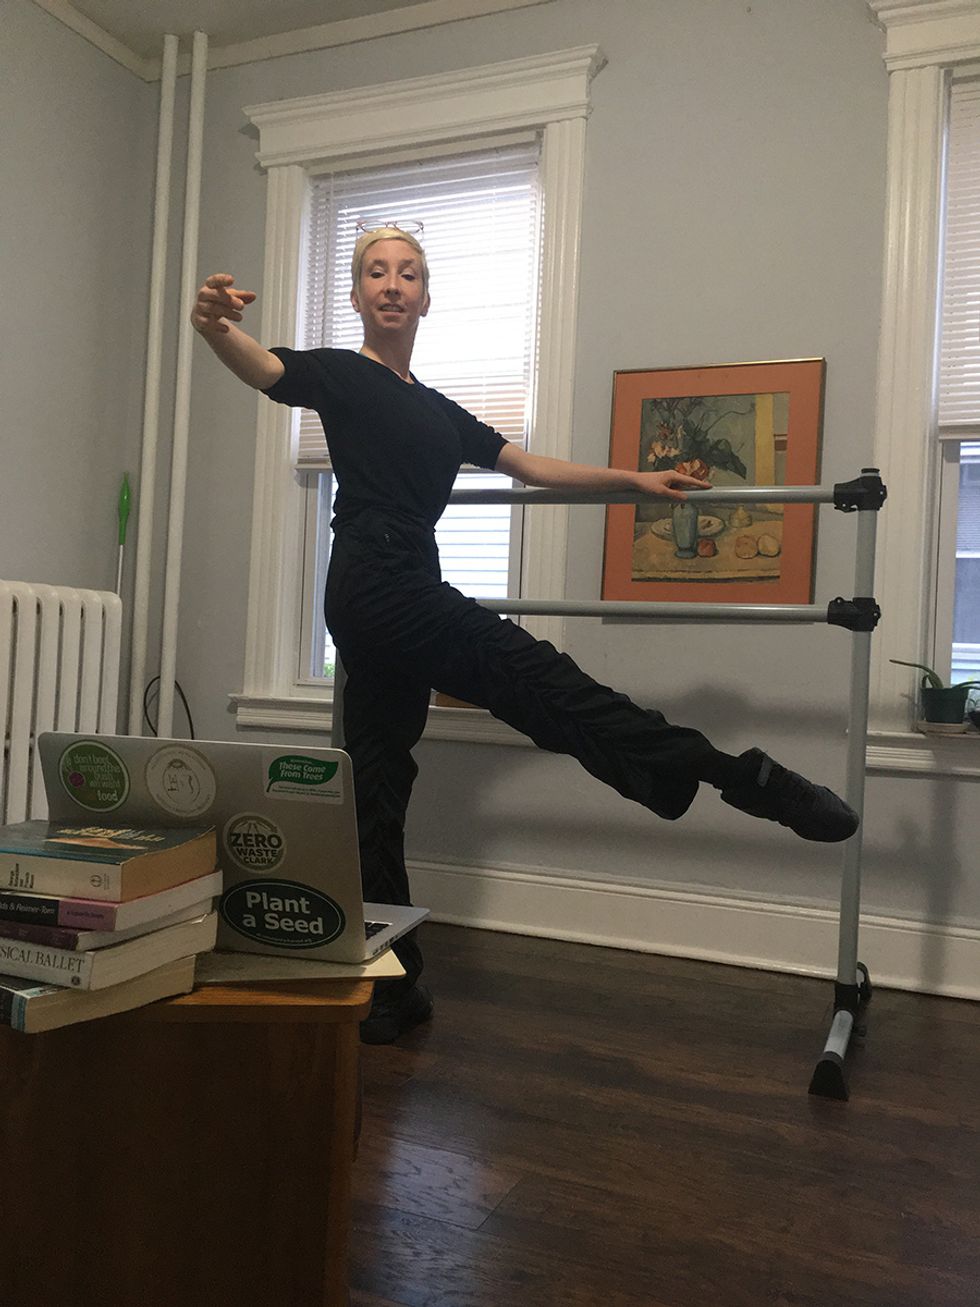 Rosner teaches at the small barre in her home, outside leg extended to degagu00e9, and smiling at the laptop screen.